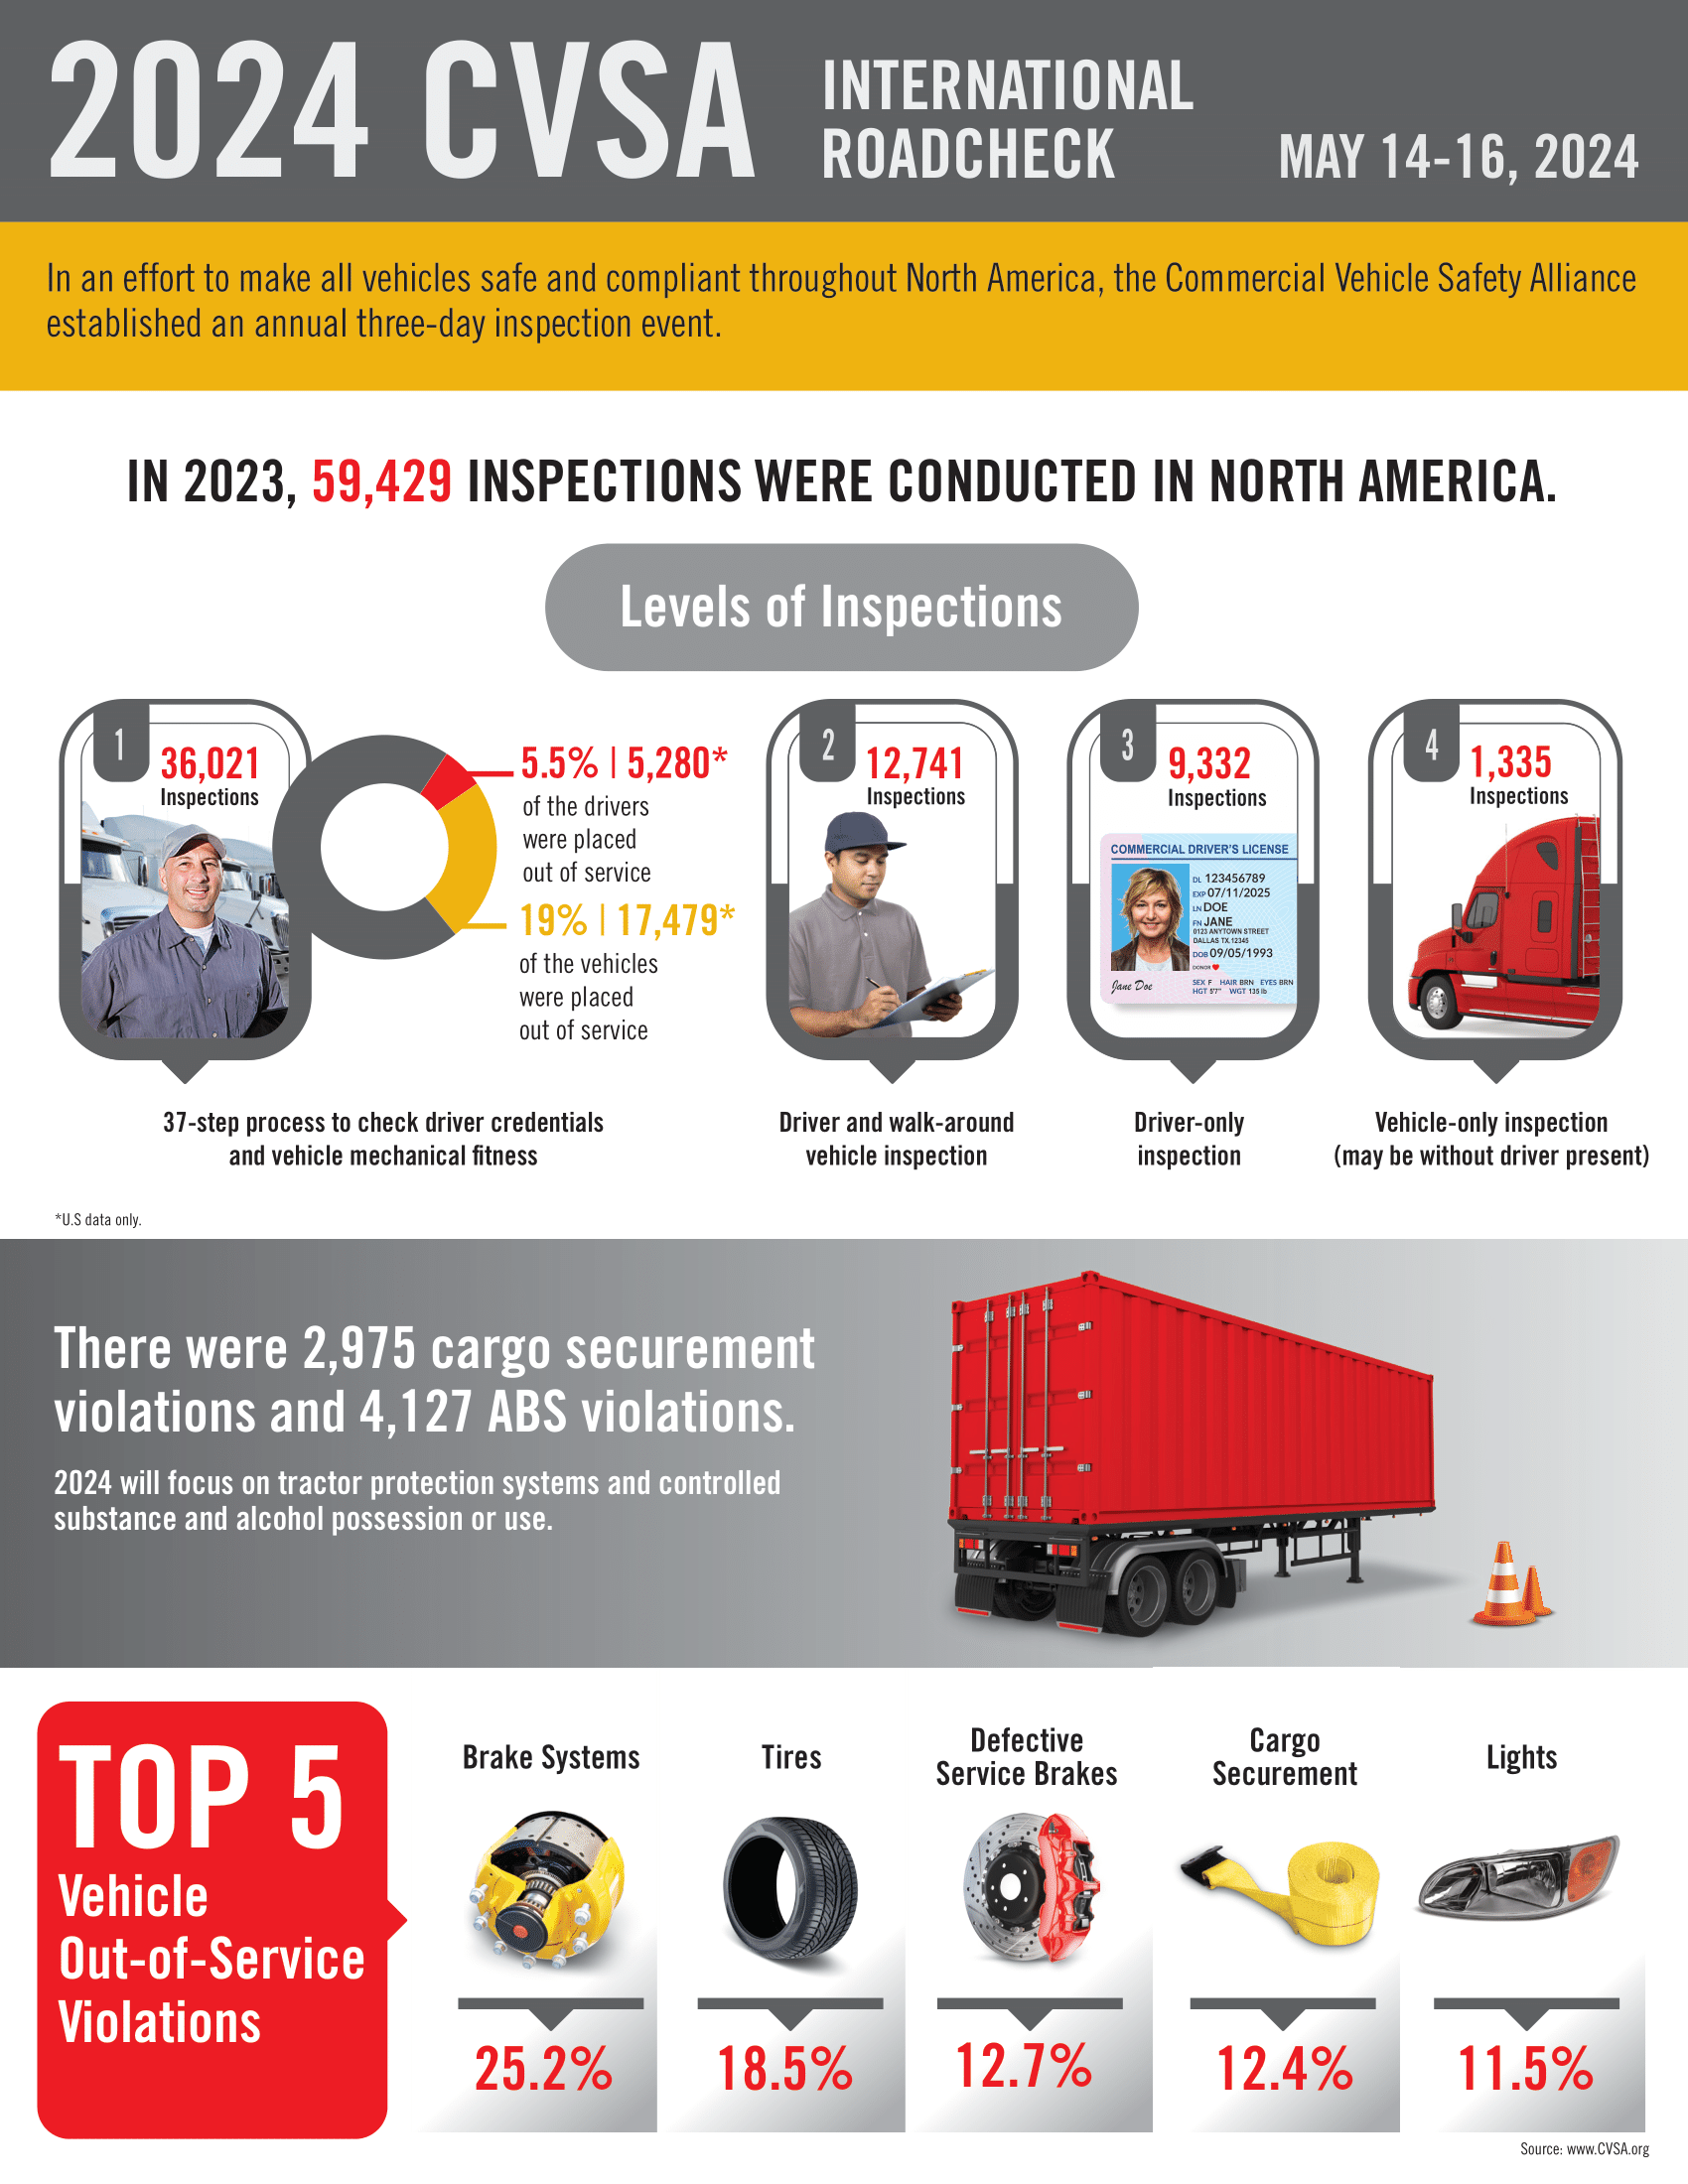 2023 CVSA International Roadcheck Results Infographic